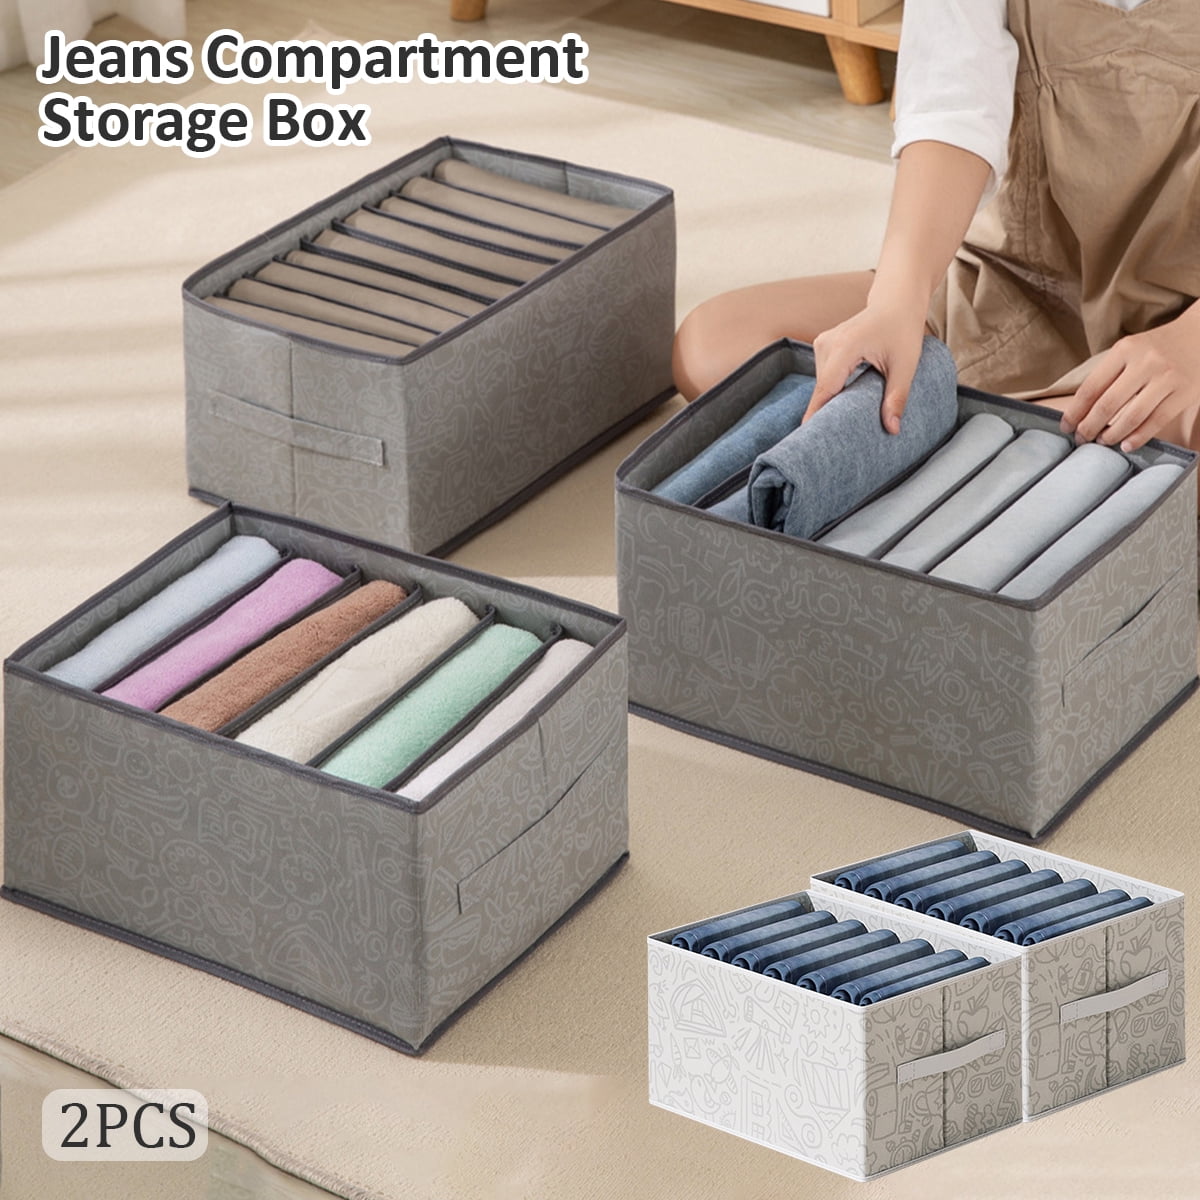 Kyoffiie Foldable Portable Storage Box Jeans Compartment Storage Box Closet  Organizer Storage Boxes with Small 7 Grids 